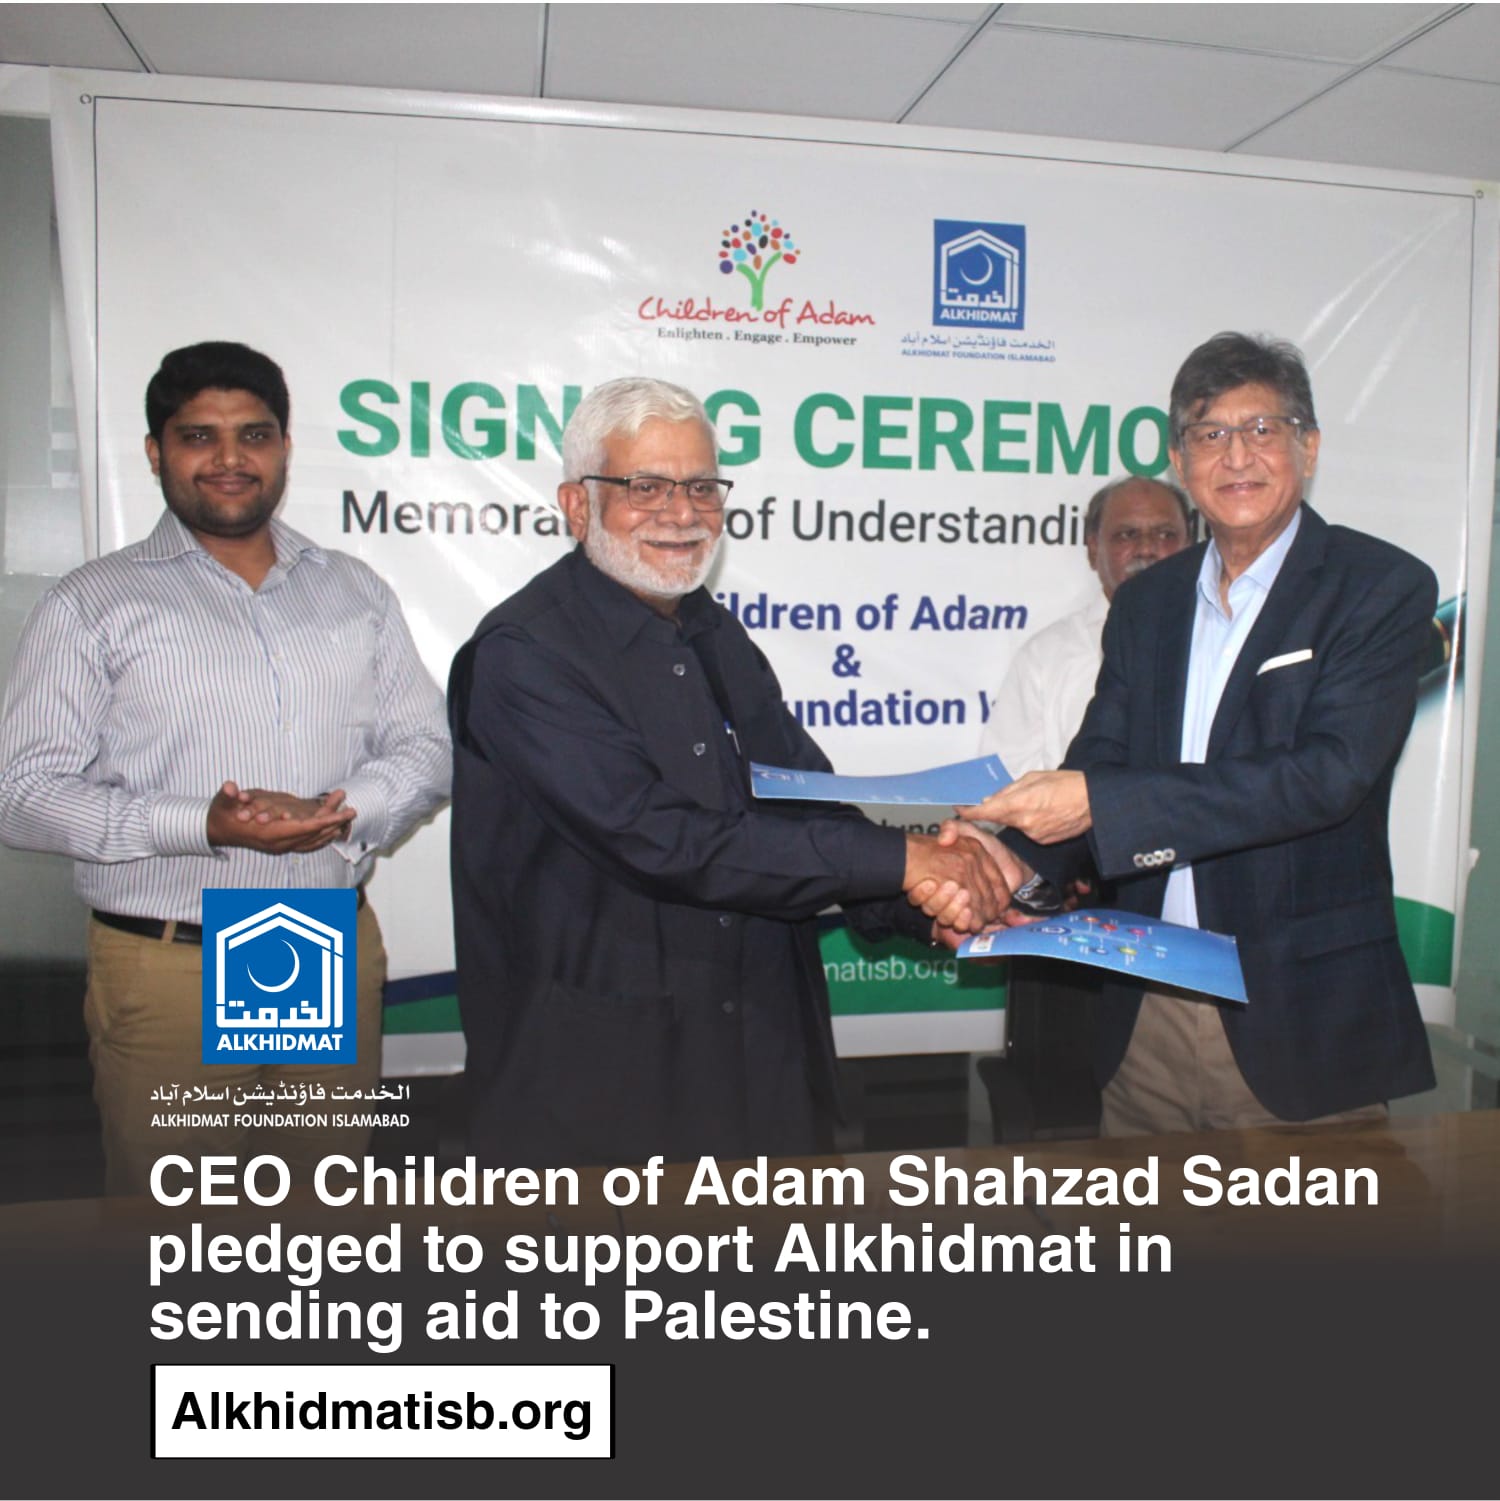 Alkhidmat Foundation Islamabad and Children of Adam signed a MoU